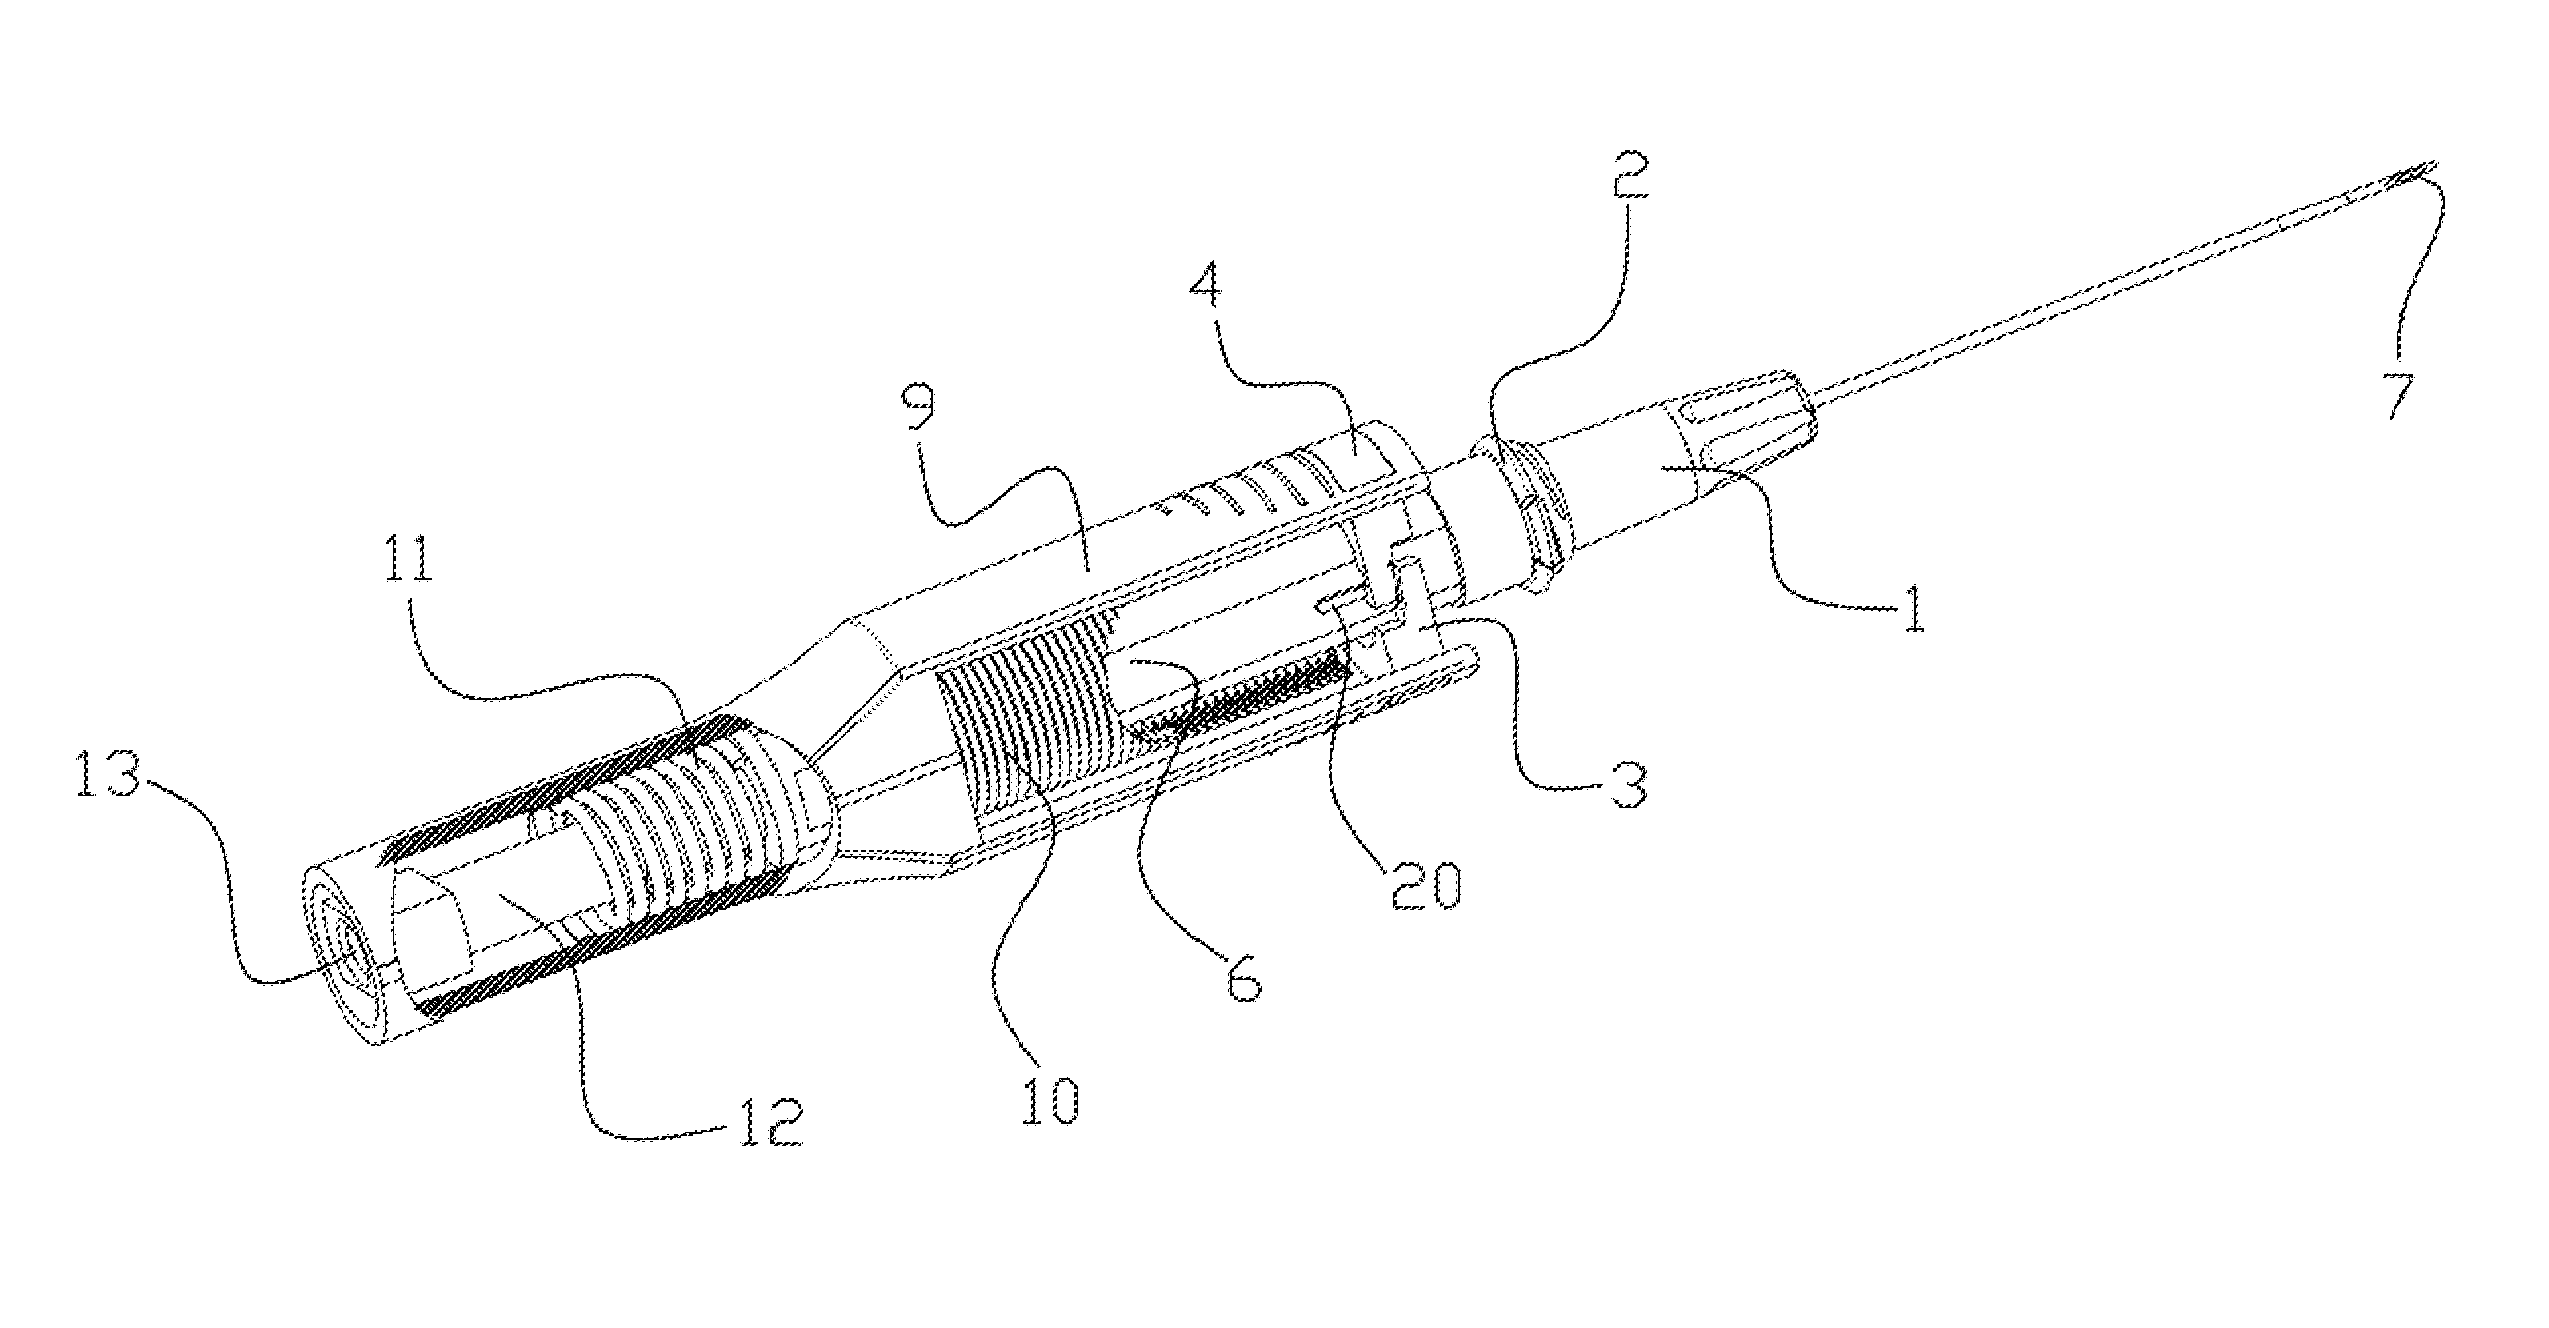 Peripheral intravenous safety catheter with quick, painless puncture system